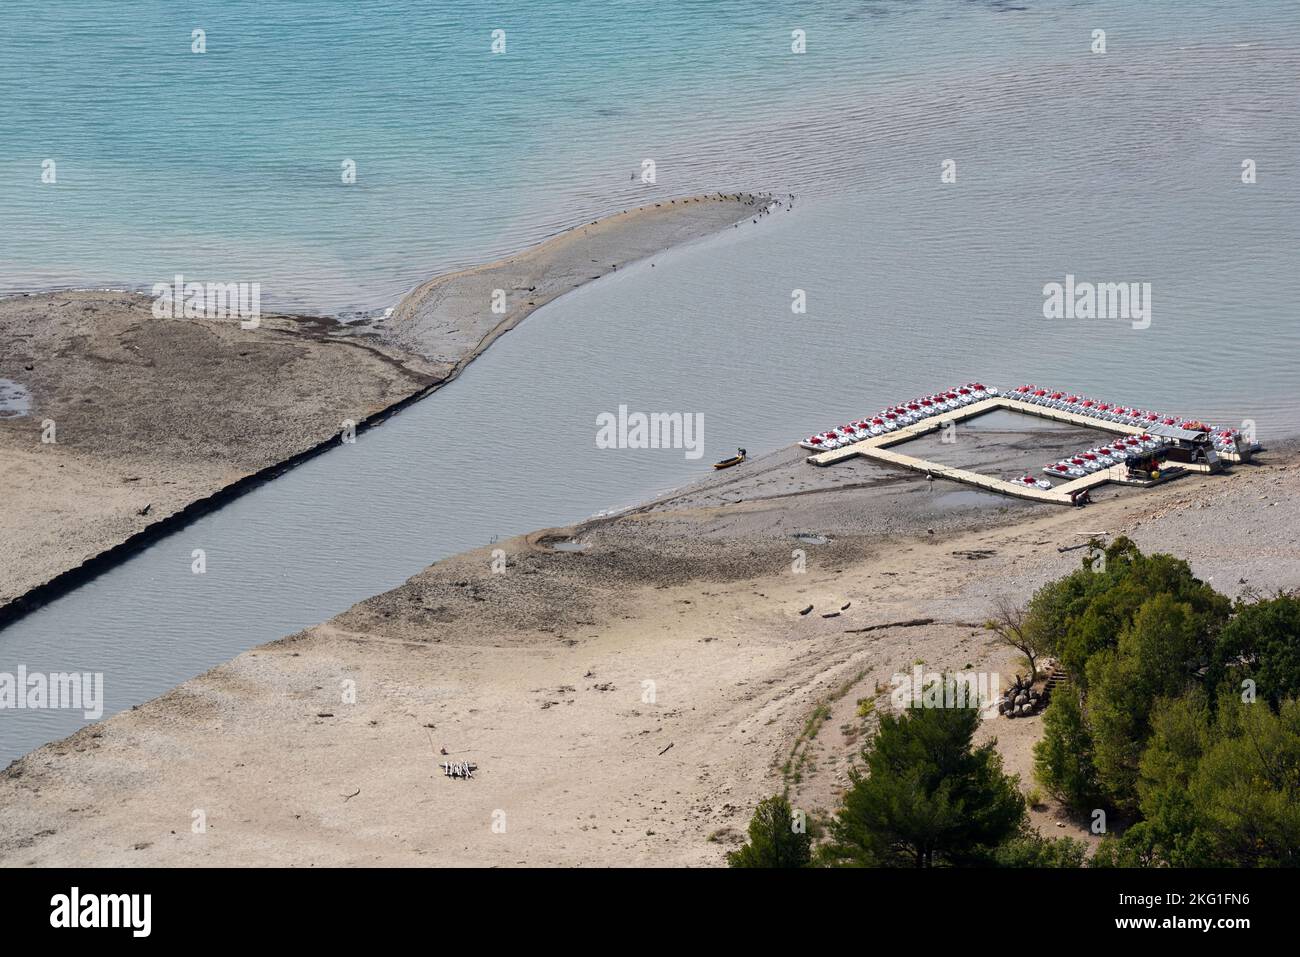 Low Water Level Exposing Boat Pontoon during Drought Saint Croix Lake Var Provence France Stock Photo